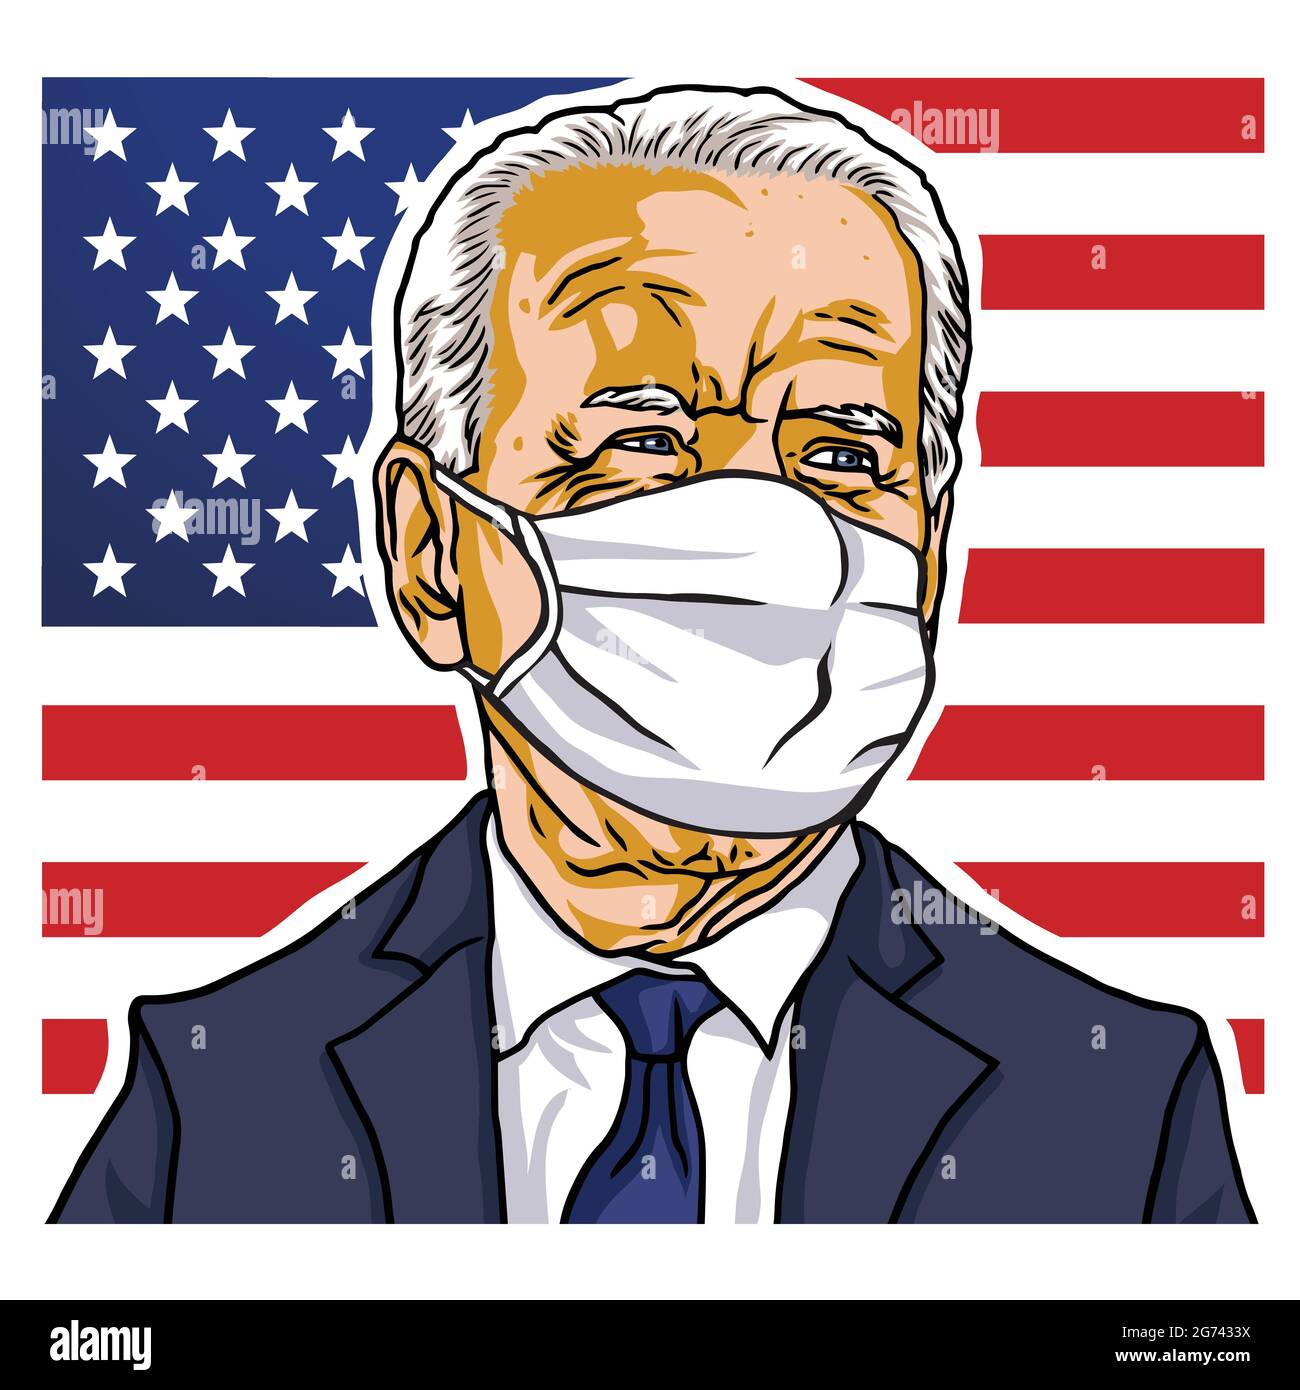 Joe biden mask 2020 Cut Out Stock Images & Pictures - Alamy